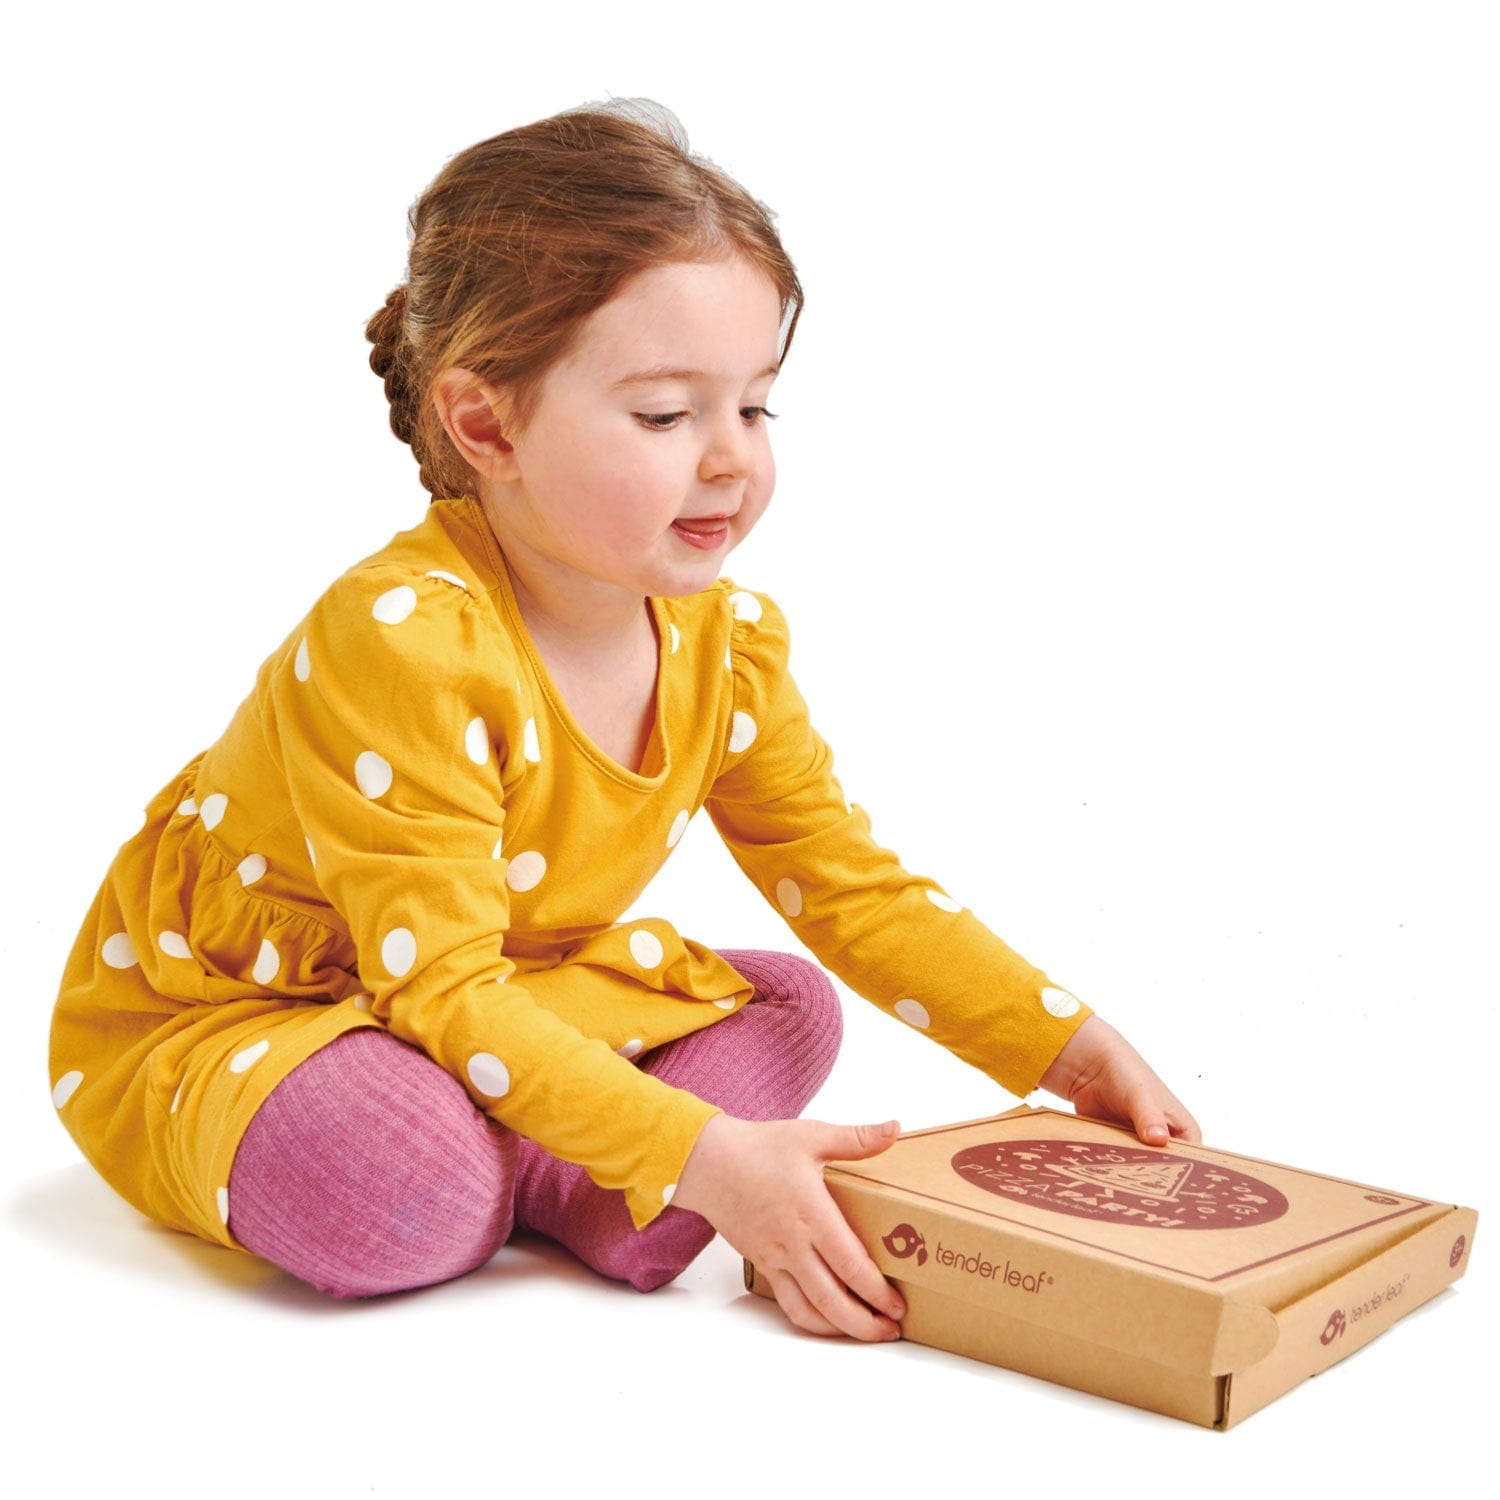 Tender Leaf Toys Toys Pizza Party